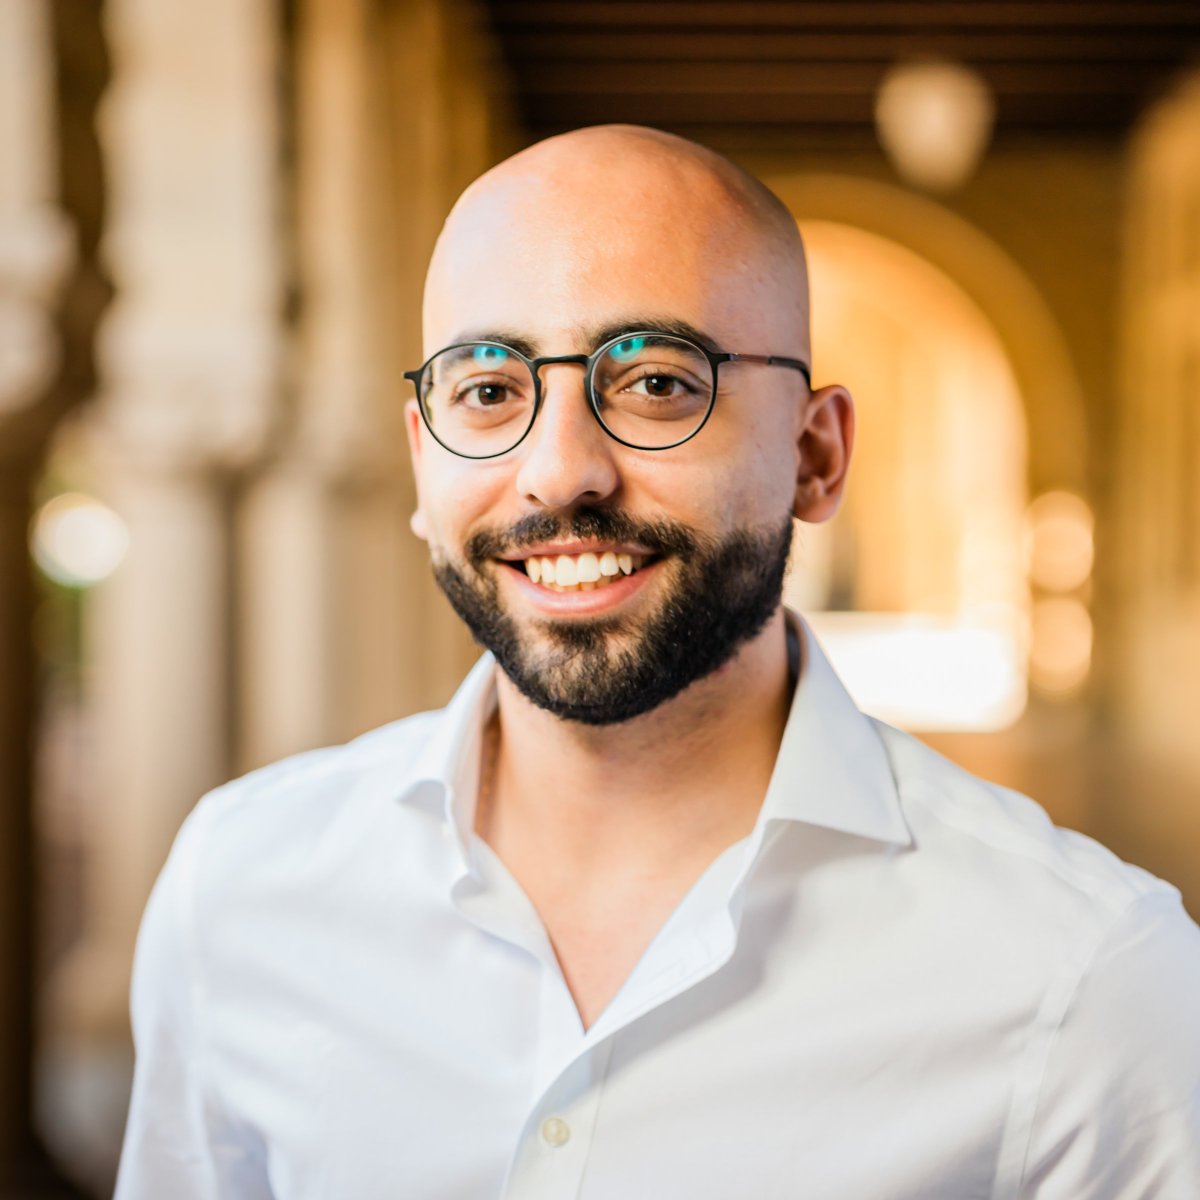 Meet @DimitriSaad, PhD candidate in Energy Science and Engineering. His research aims to understand California's path to net-zero. Although he appreciates systems at scale, Saad also recognizes the community-level implications of his work. 🔗 stanford.io/3vlV5Cs